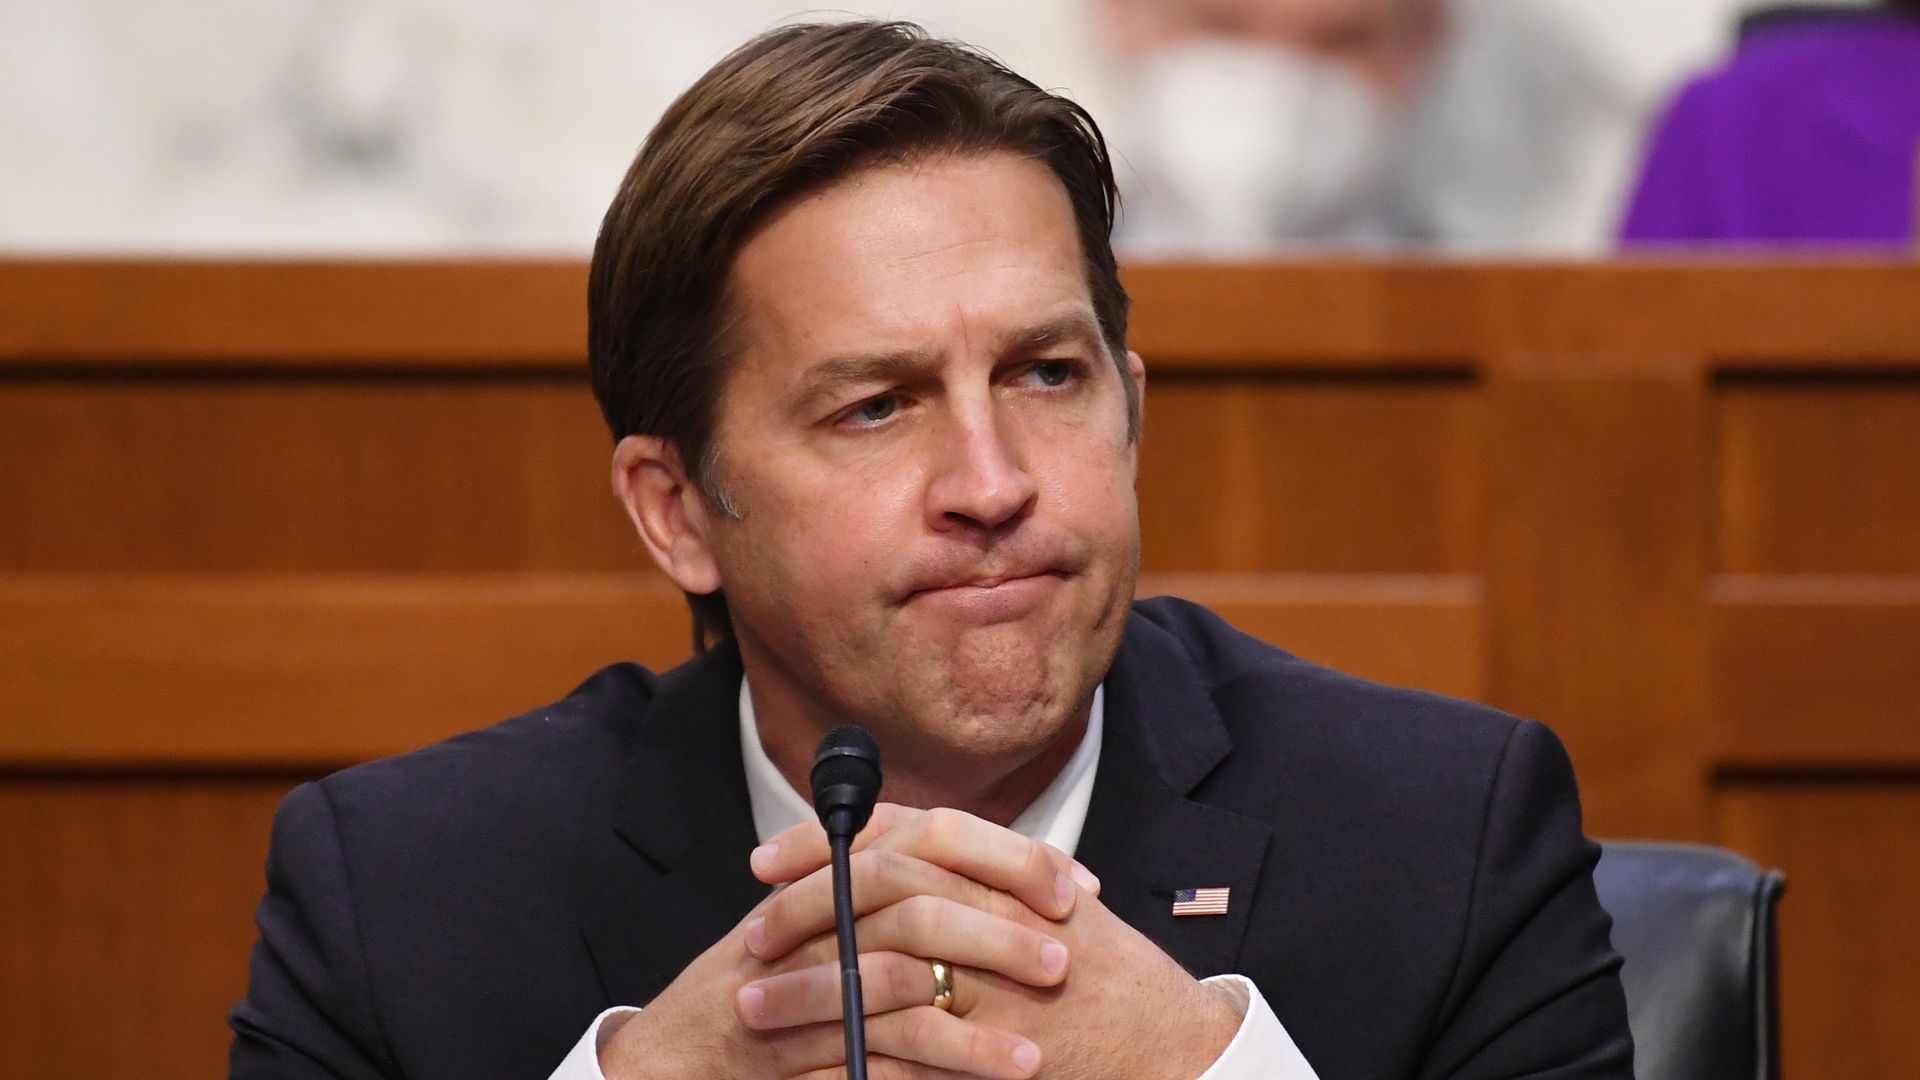 Sen. Ben Sasse (R-NE) looks on during the fourth day of the Supreme Court confirmation hearing for nominee Judge Amy Coney Barrett before the Senate Judiciary Committee in October on Capitol Hill